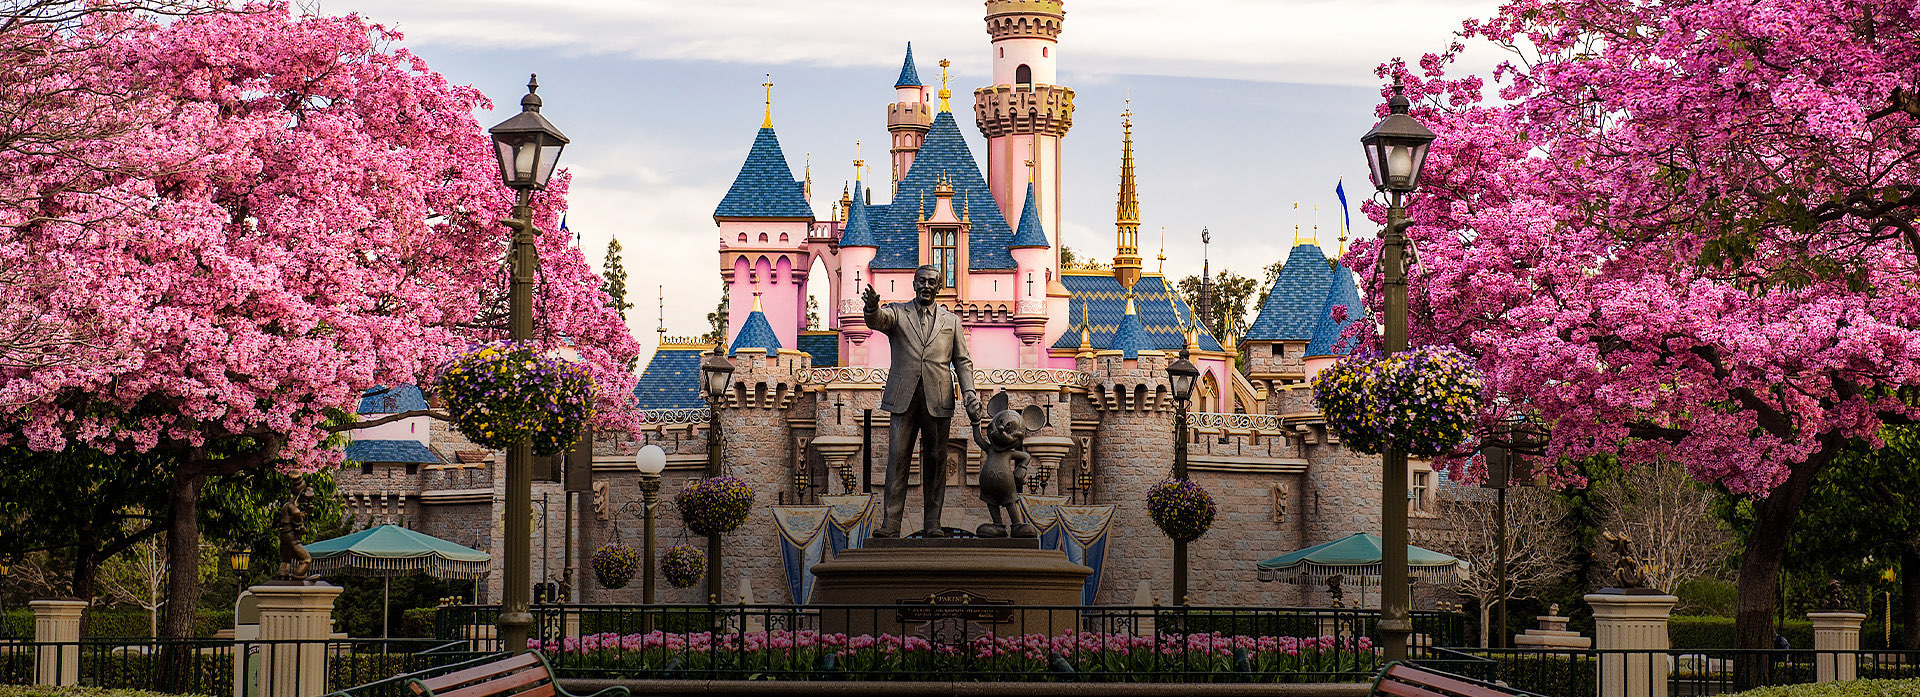 front view of the disneyland castle 